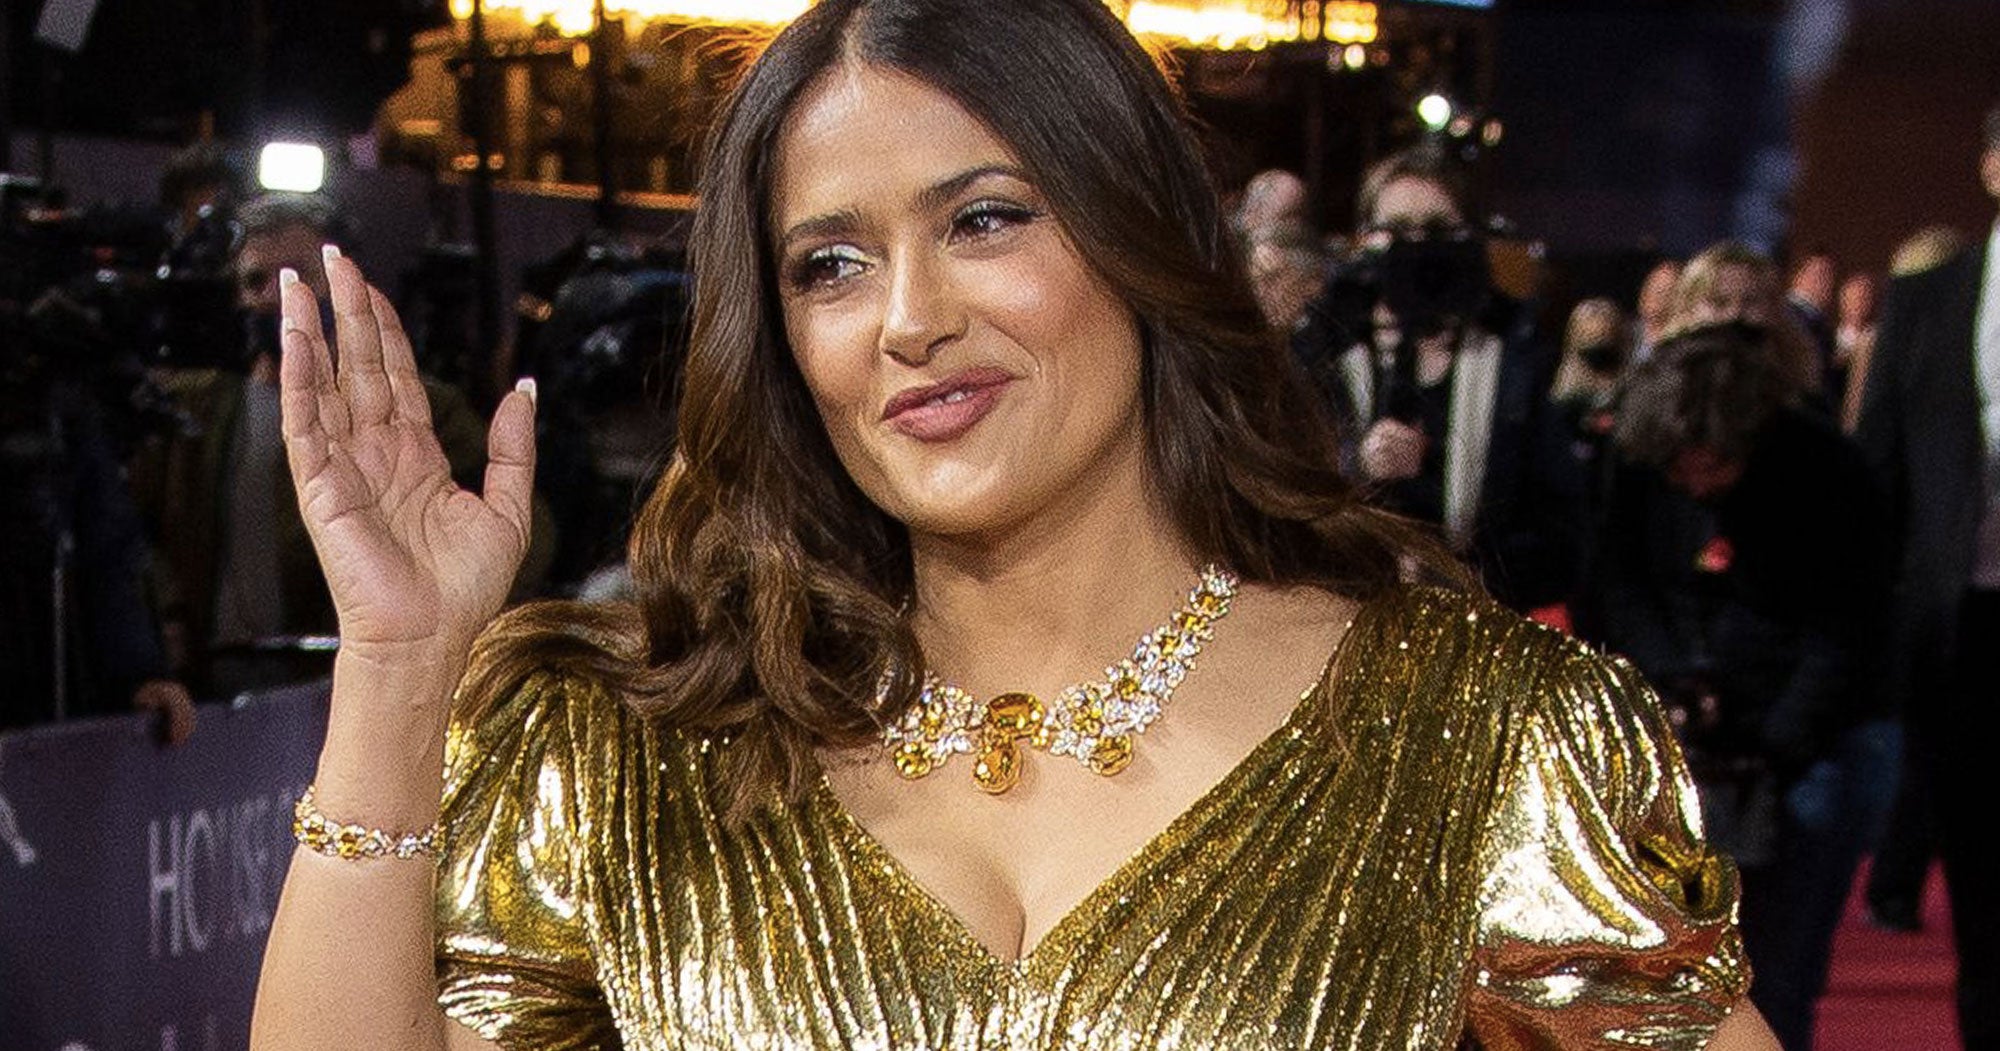 Forget Gaga, Salma Hayek Is The Star Of House Of Gucci